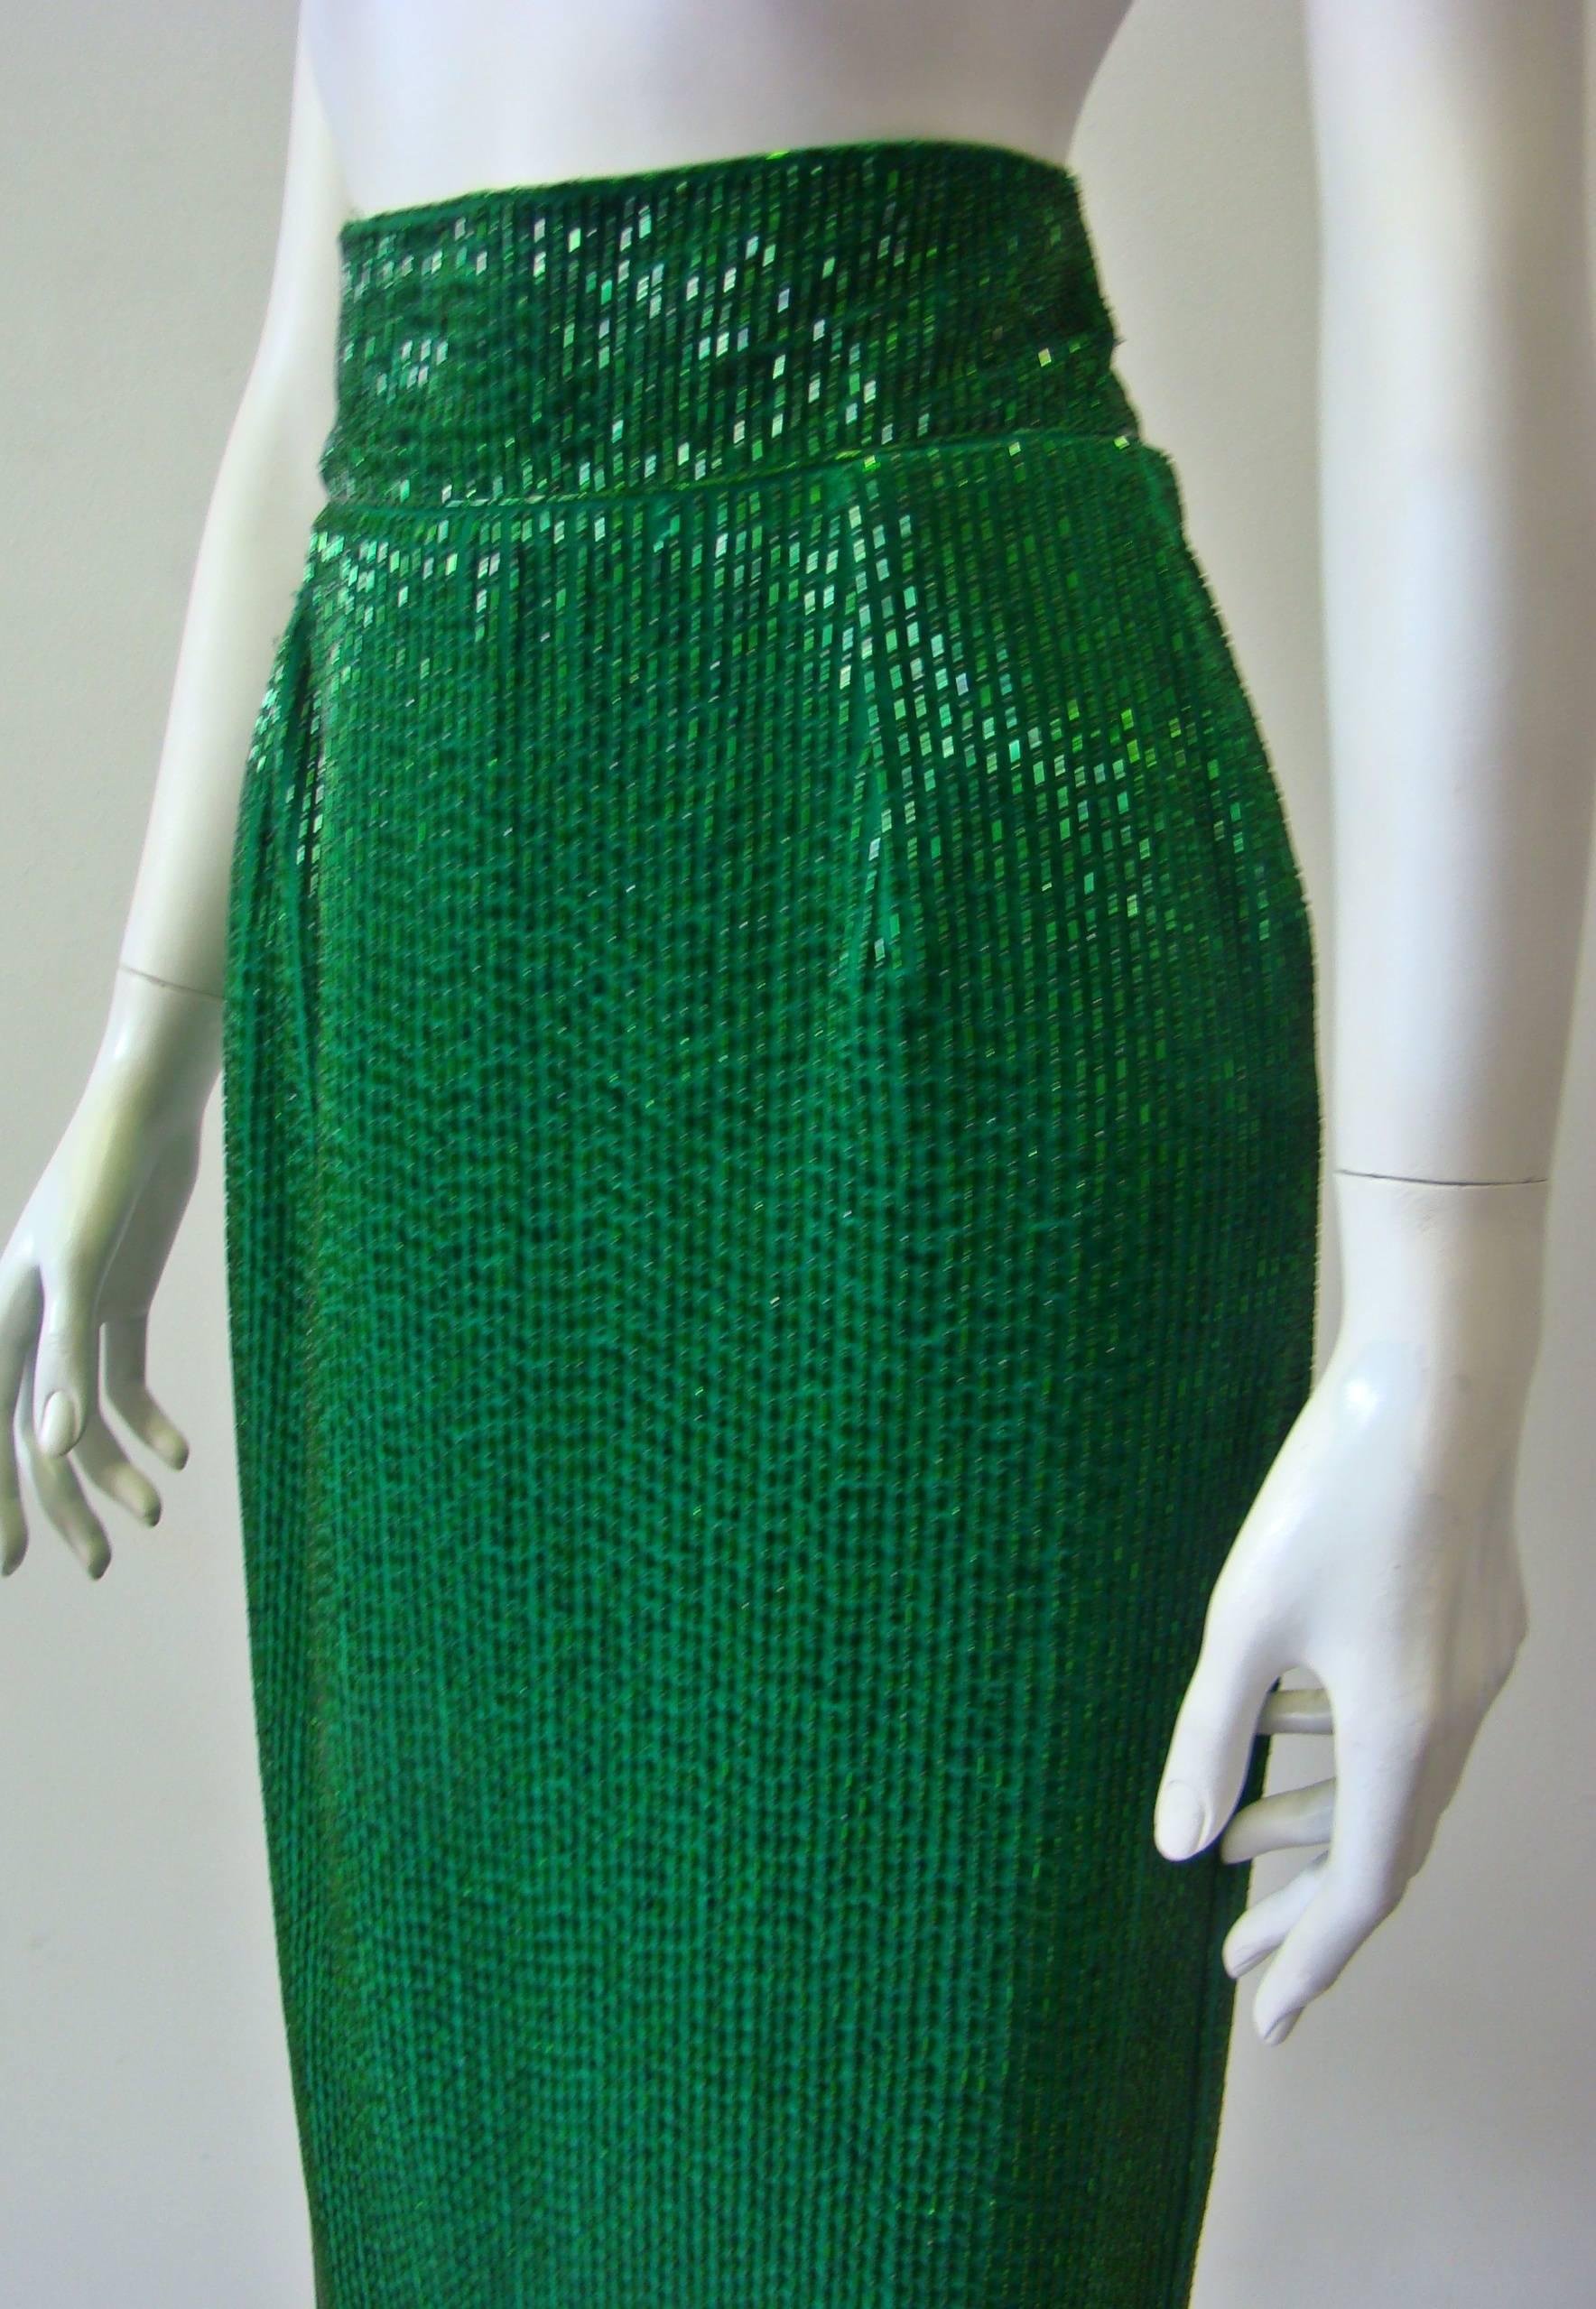 Black Early Gianni Versace Beaded Evening Skirt Fall 1983 For Sale